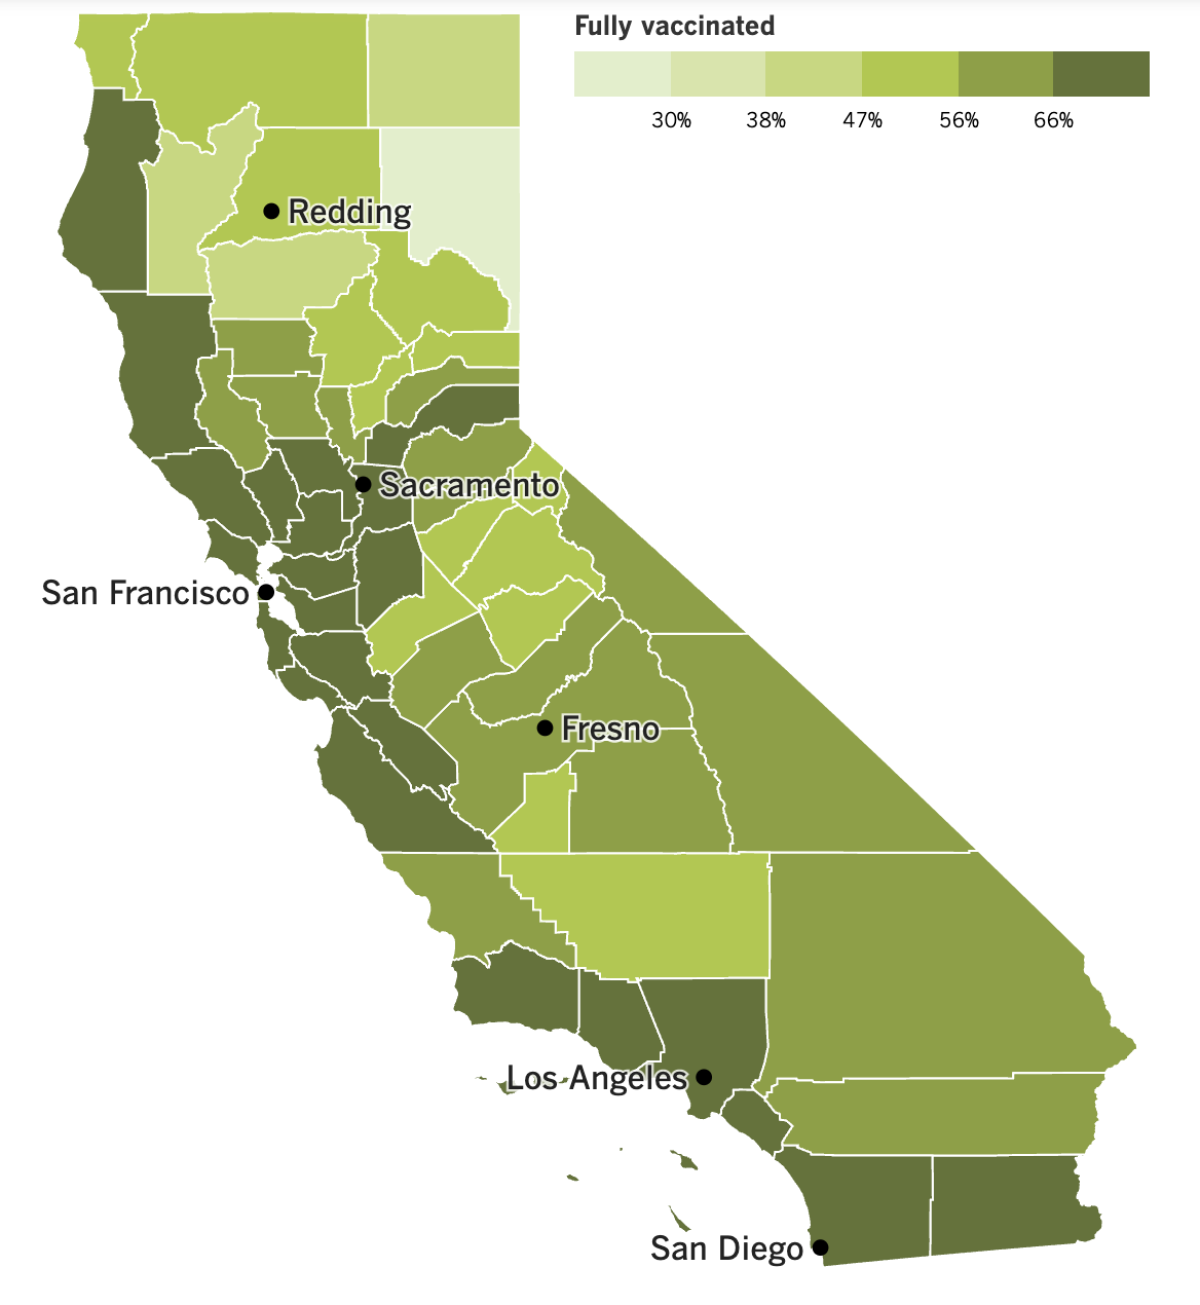 A map showing California's COVID-19 vaccination status  by county as of Dec. 20.